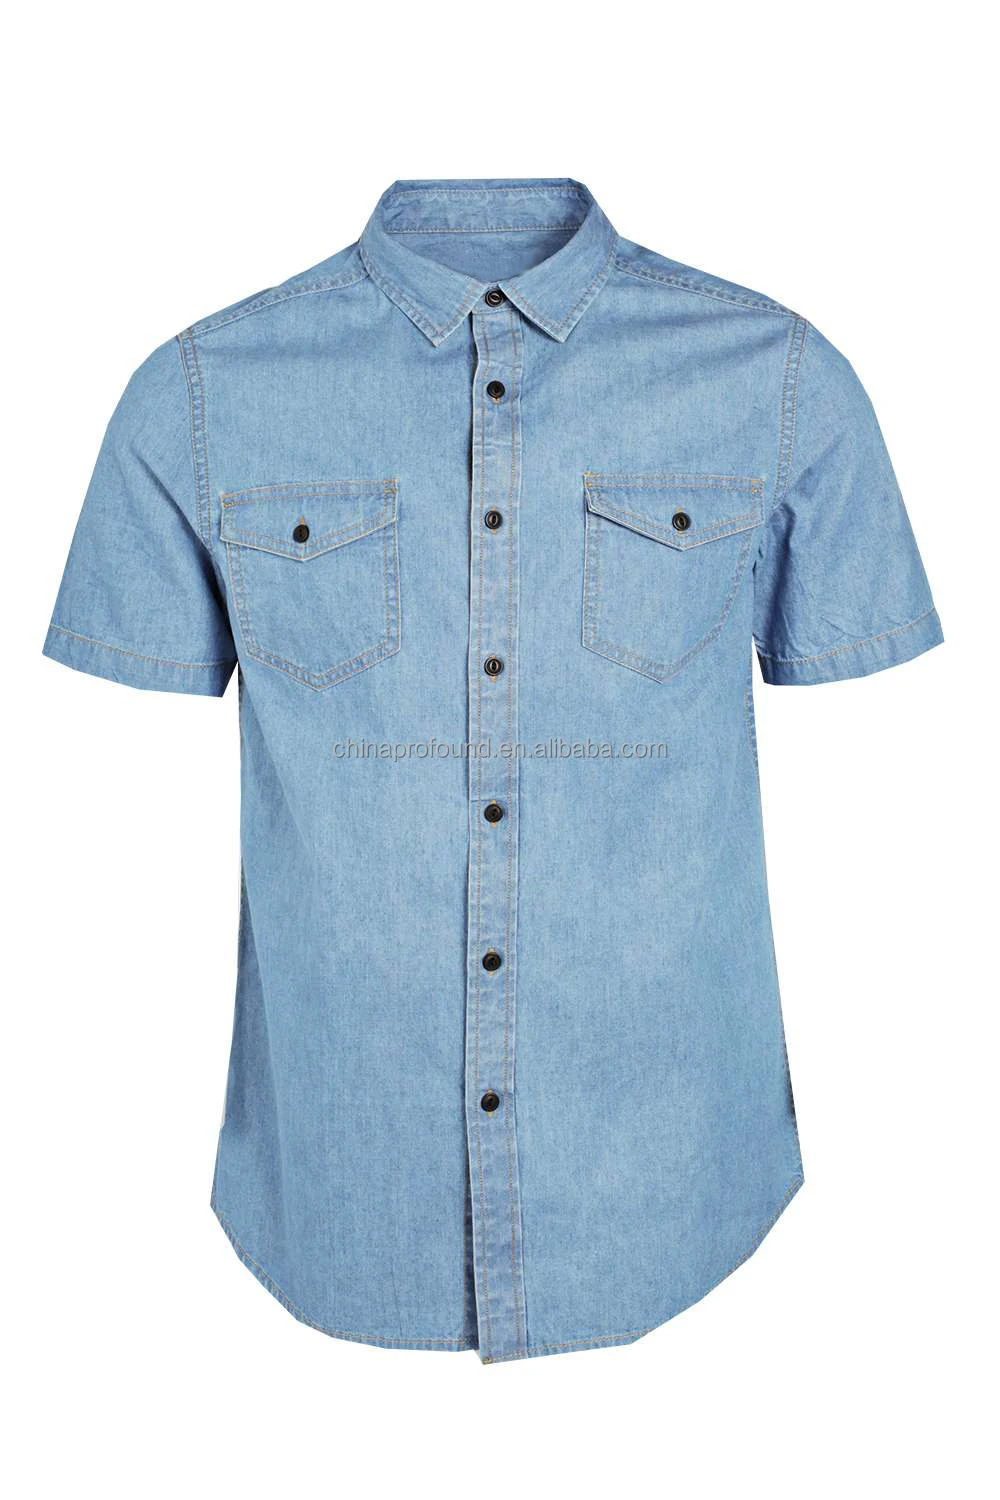 100% Cotton Men's Short Sleeve Two Pockets Denim Casual Shirt - Buy Two ...